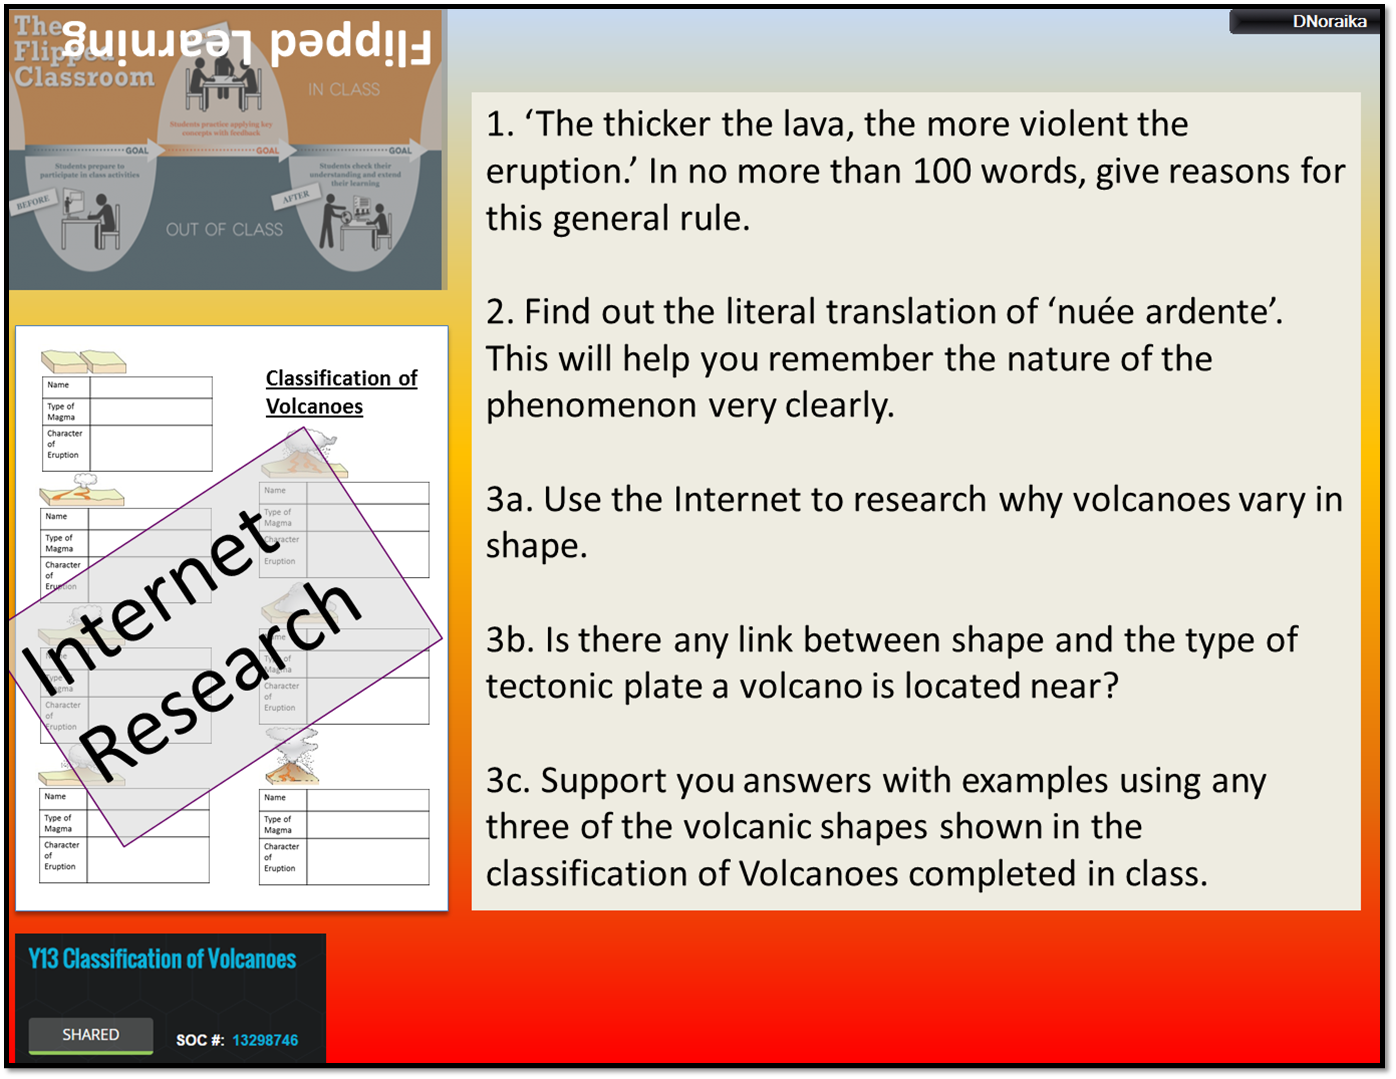 Essay on Volcanoes: Top 7 Essays on Volcanoes| Disasters | Geography